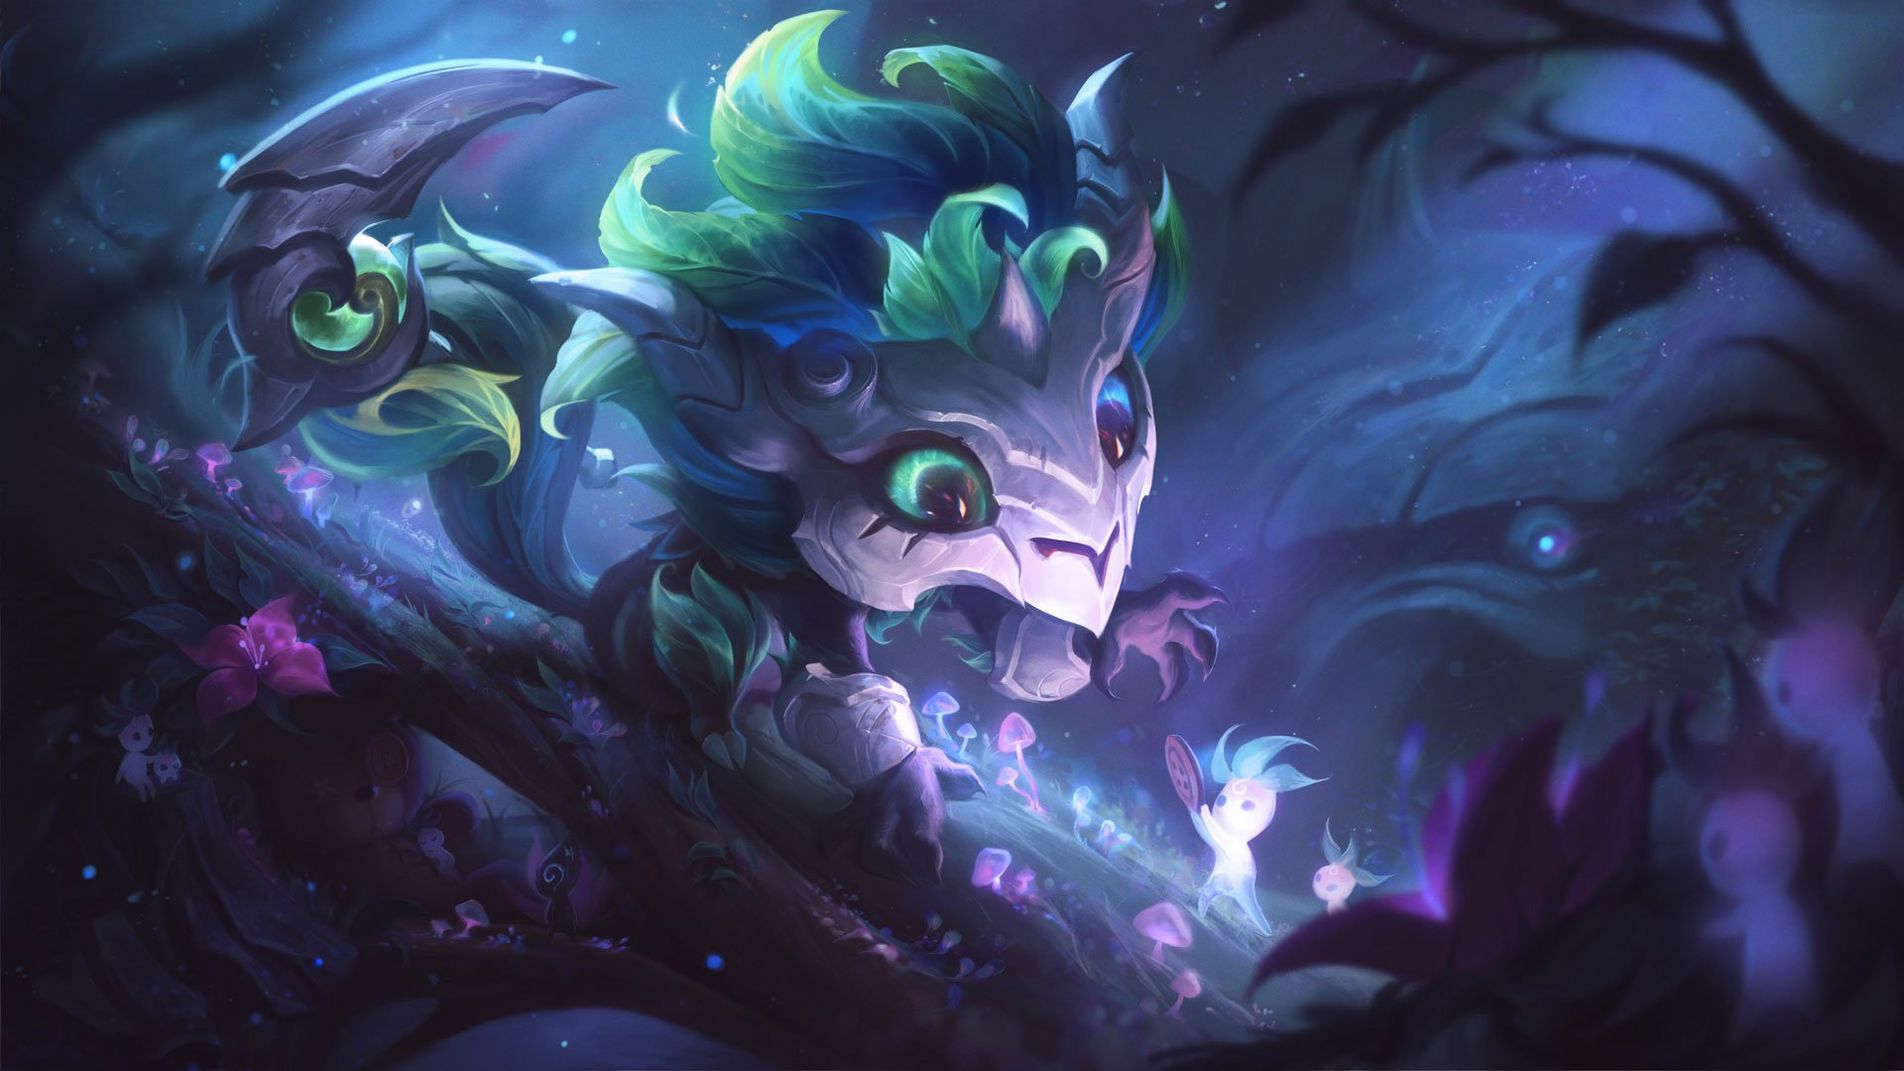 Gnar is a shapeshifting Jade Champ in Teamfight Tactics